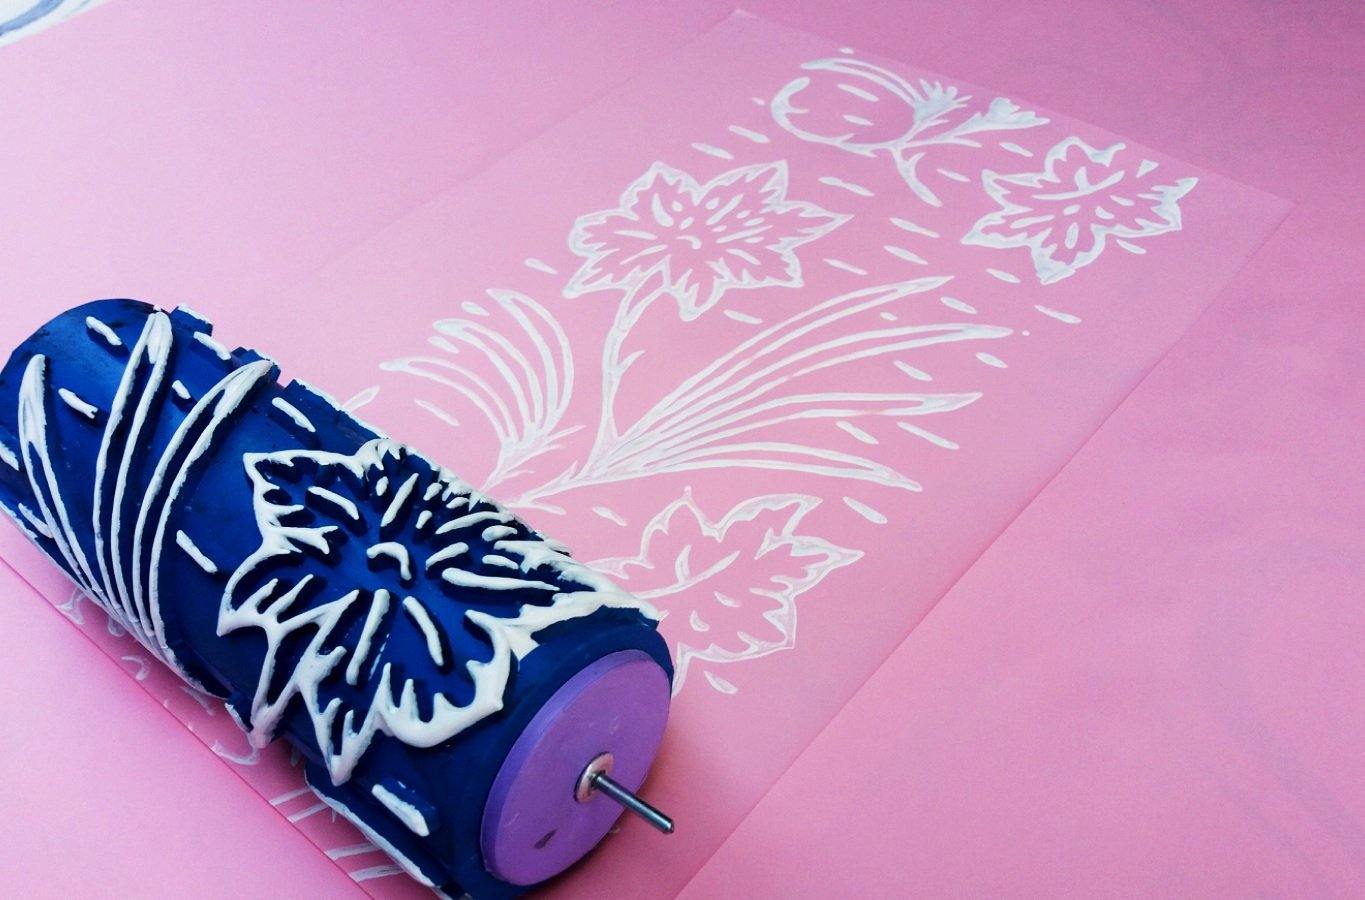 Paint rollerNo32,NATURE,Pattern, Rubber decor roller 15cm, patterned paint roller designs